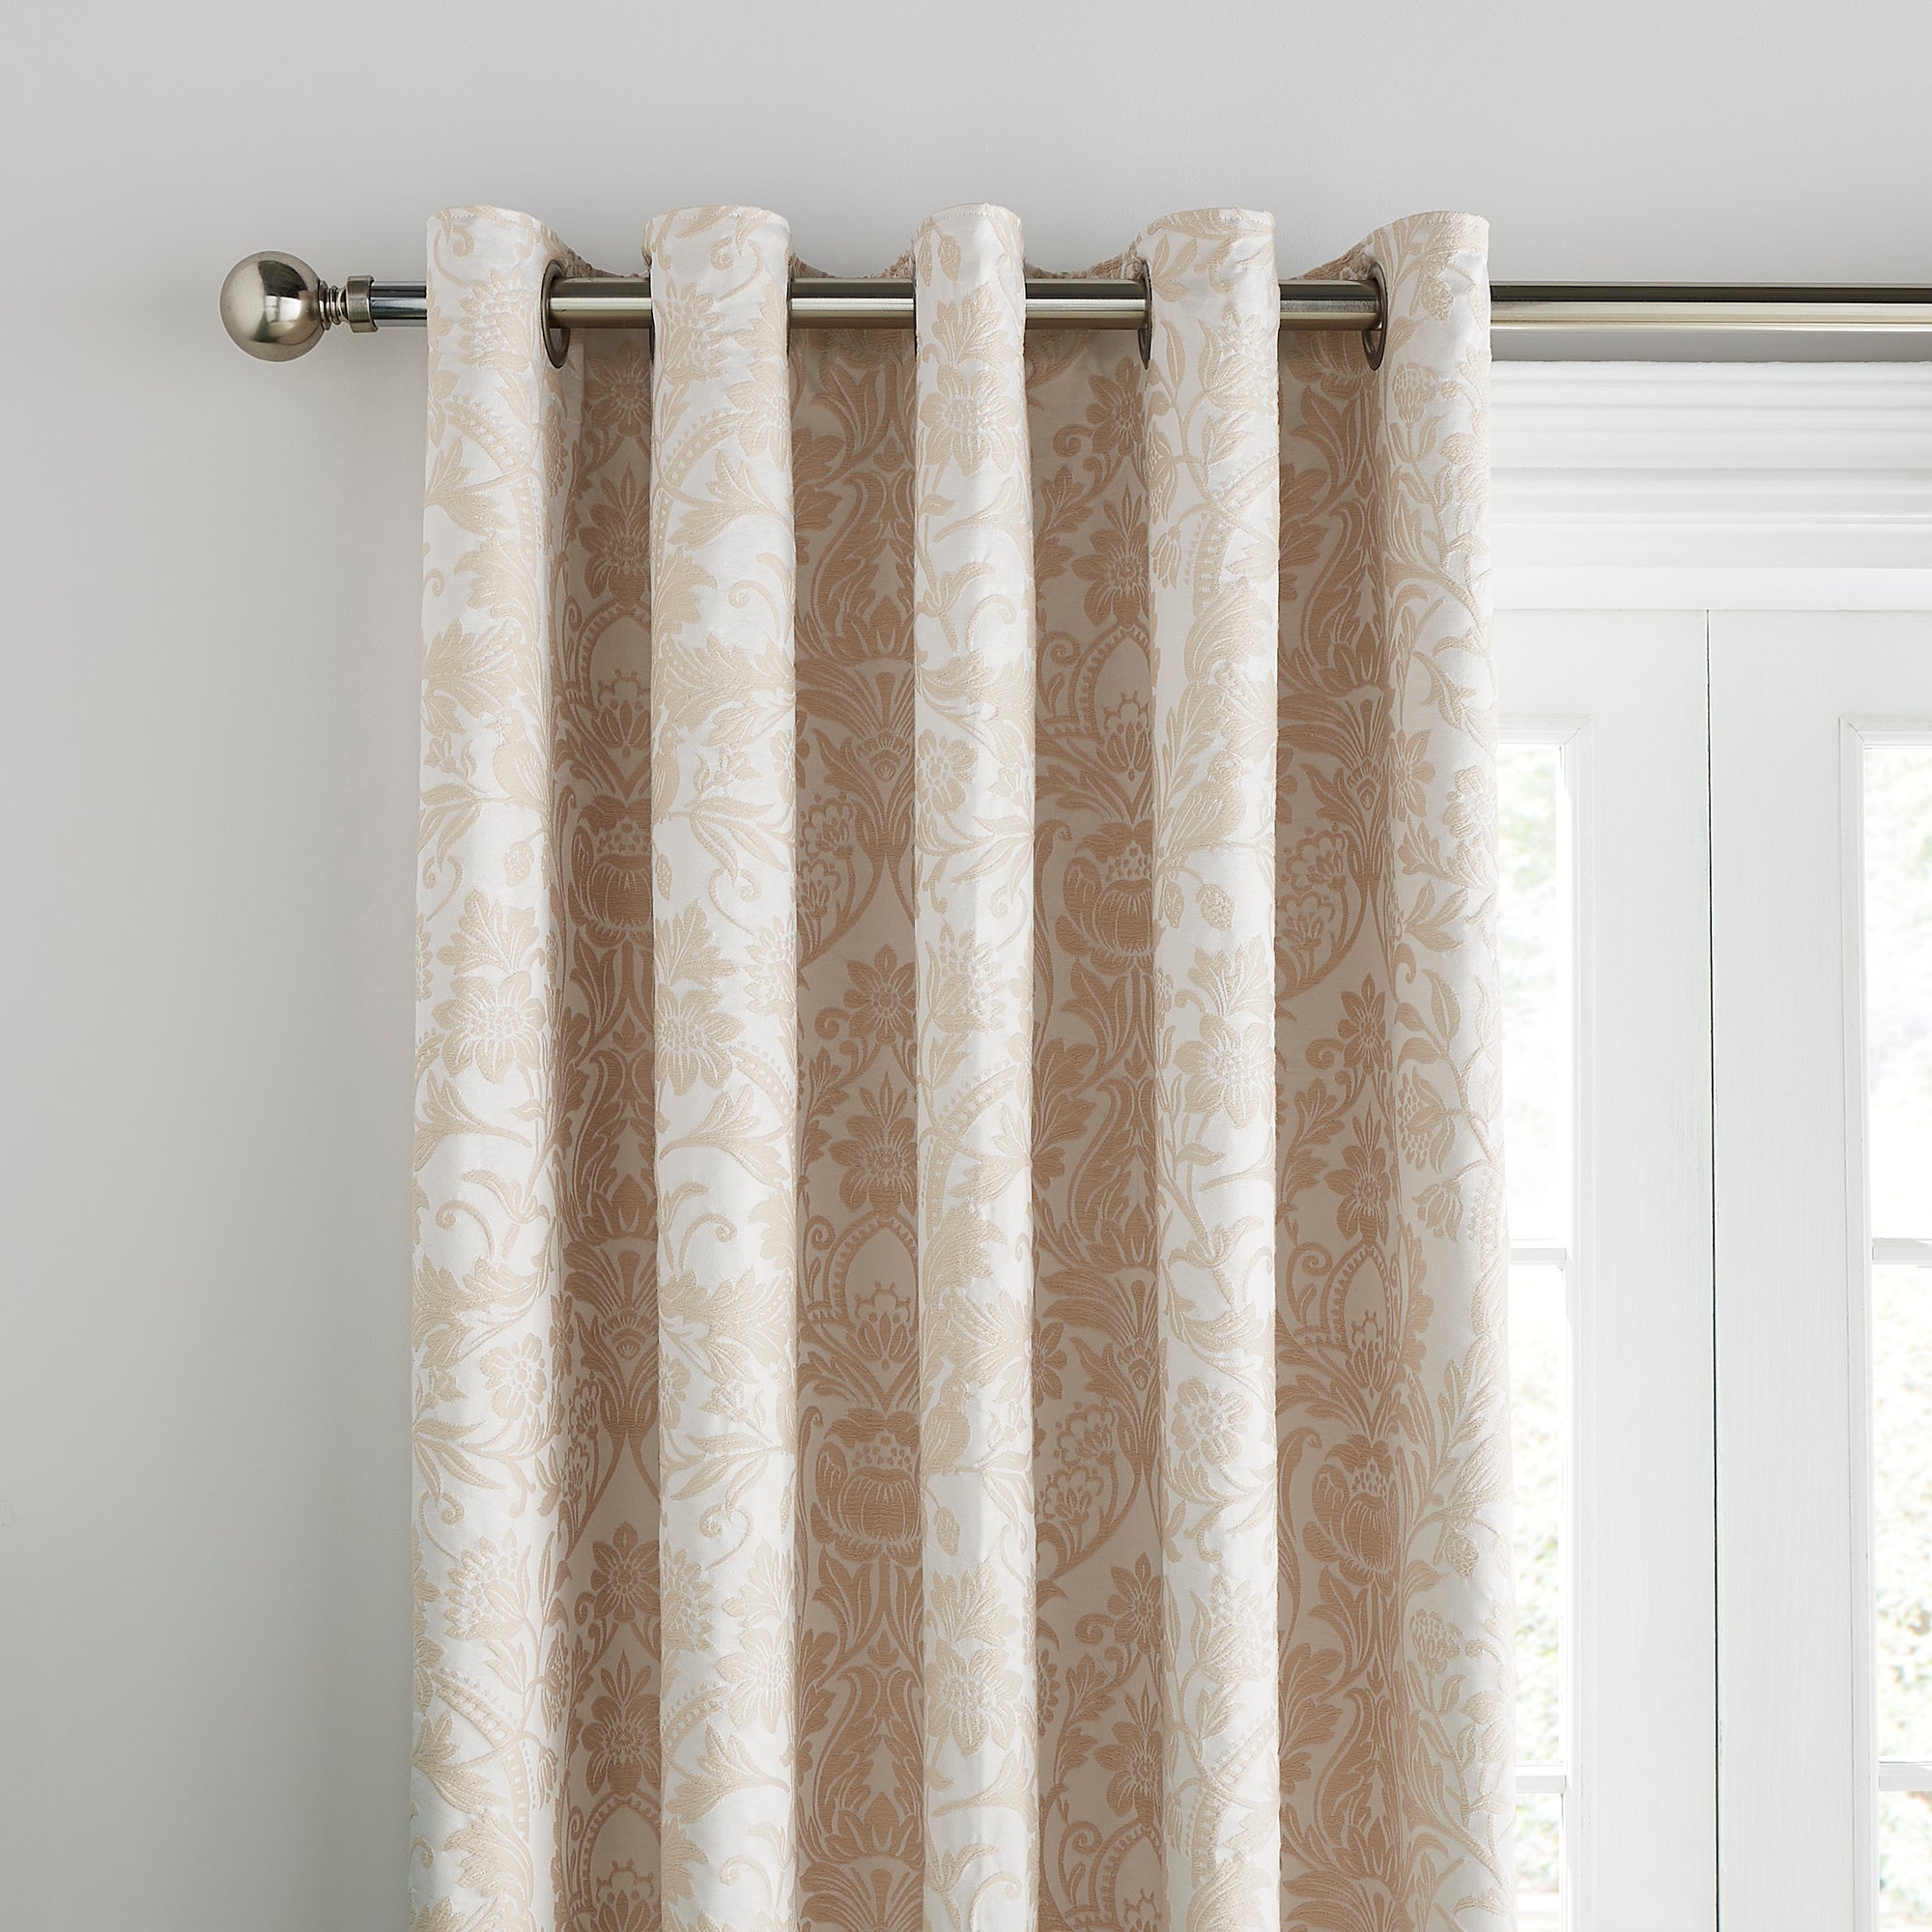 Dorma Winchester Blackout Eyelet Curtains